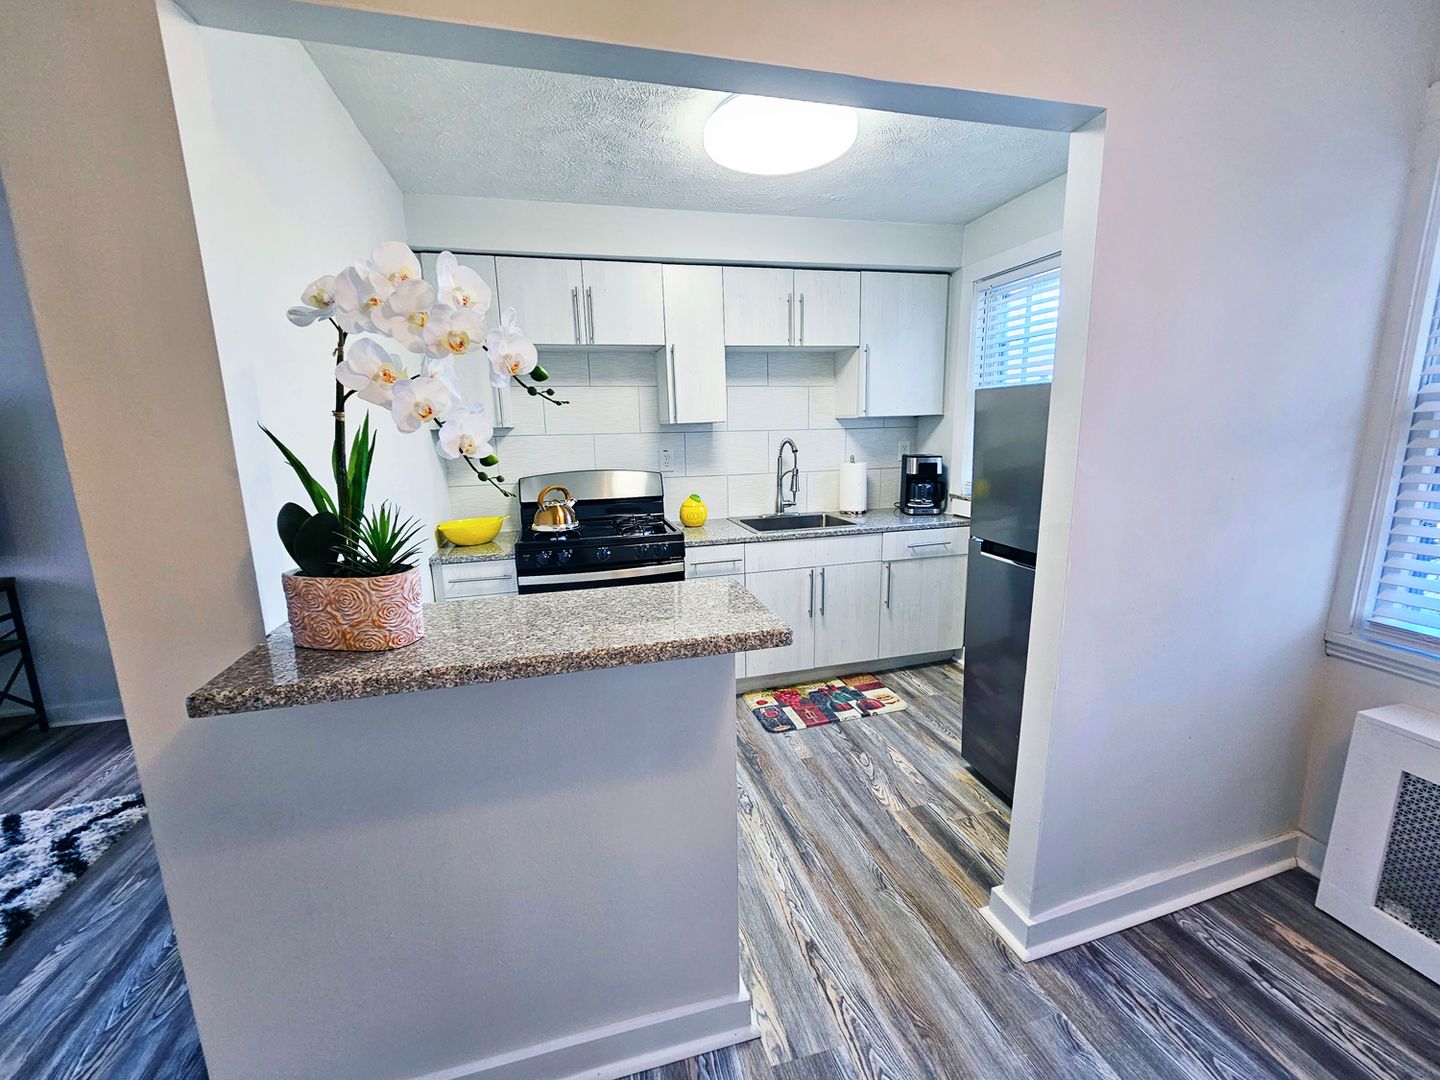 2 Bed and 1 Bath Apartments for Rent in Shaker Heights | Newly Renovated Image